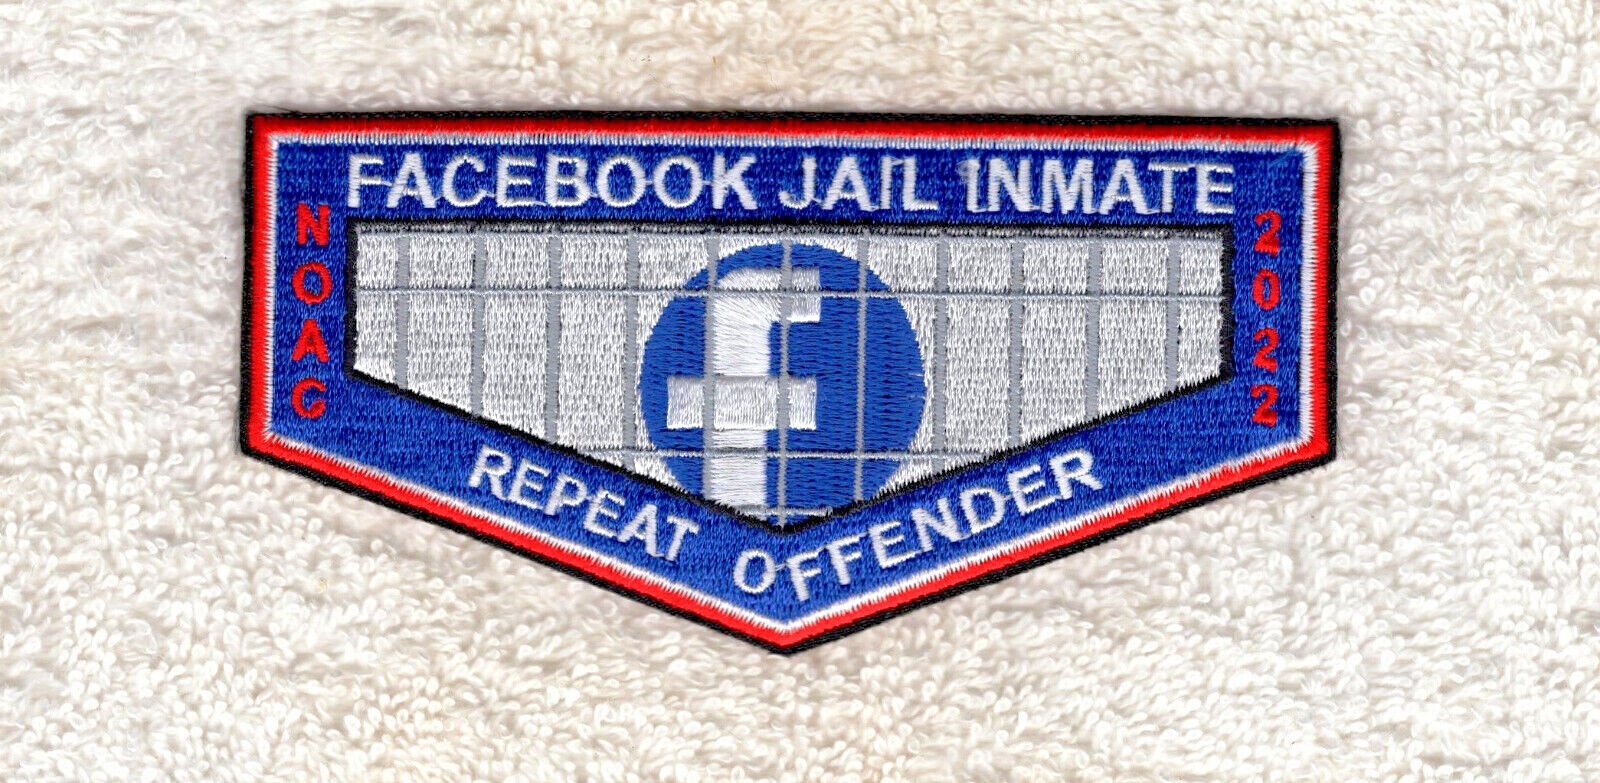 P2 213 oa bsa scouts NOAC 2022 /  FACEBOOK JAIL INMATE - REPEAT OFFENDER